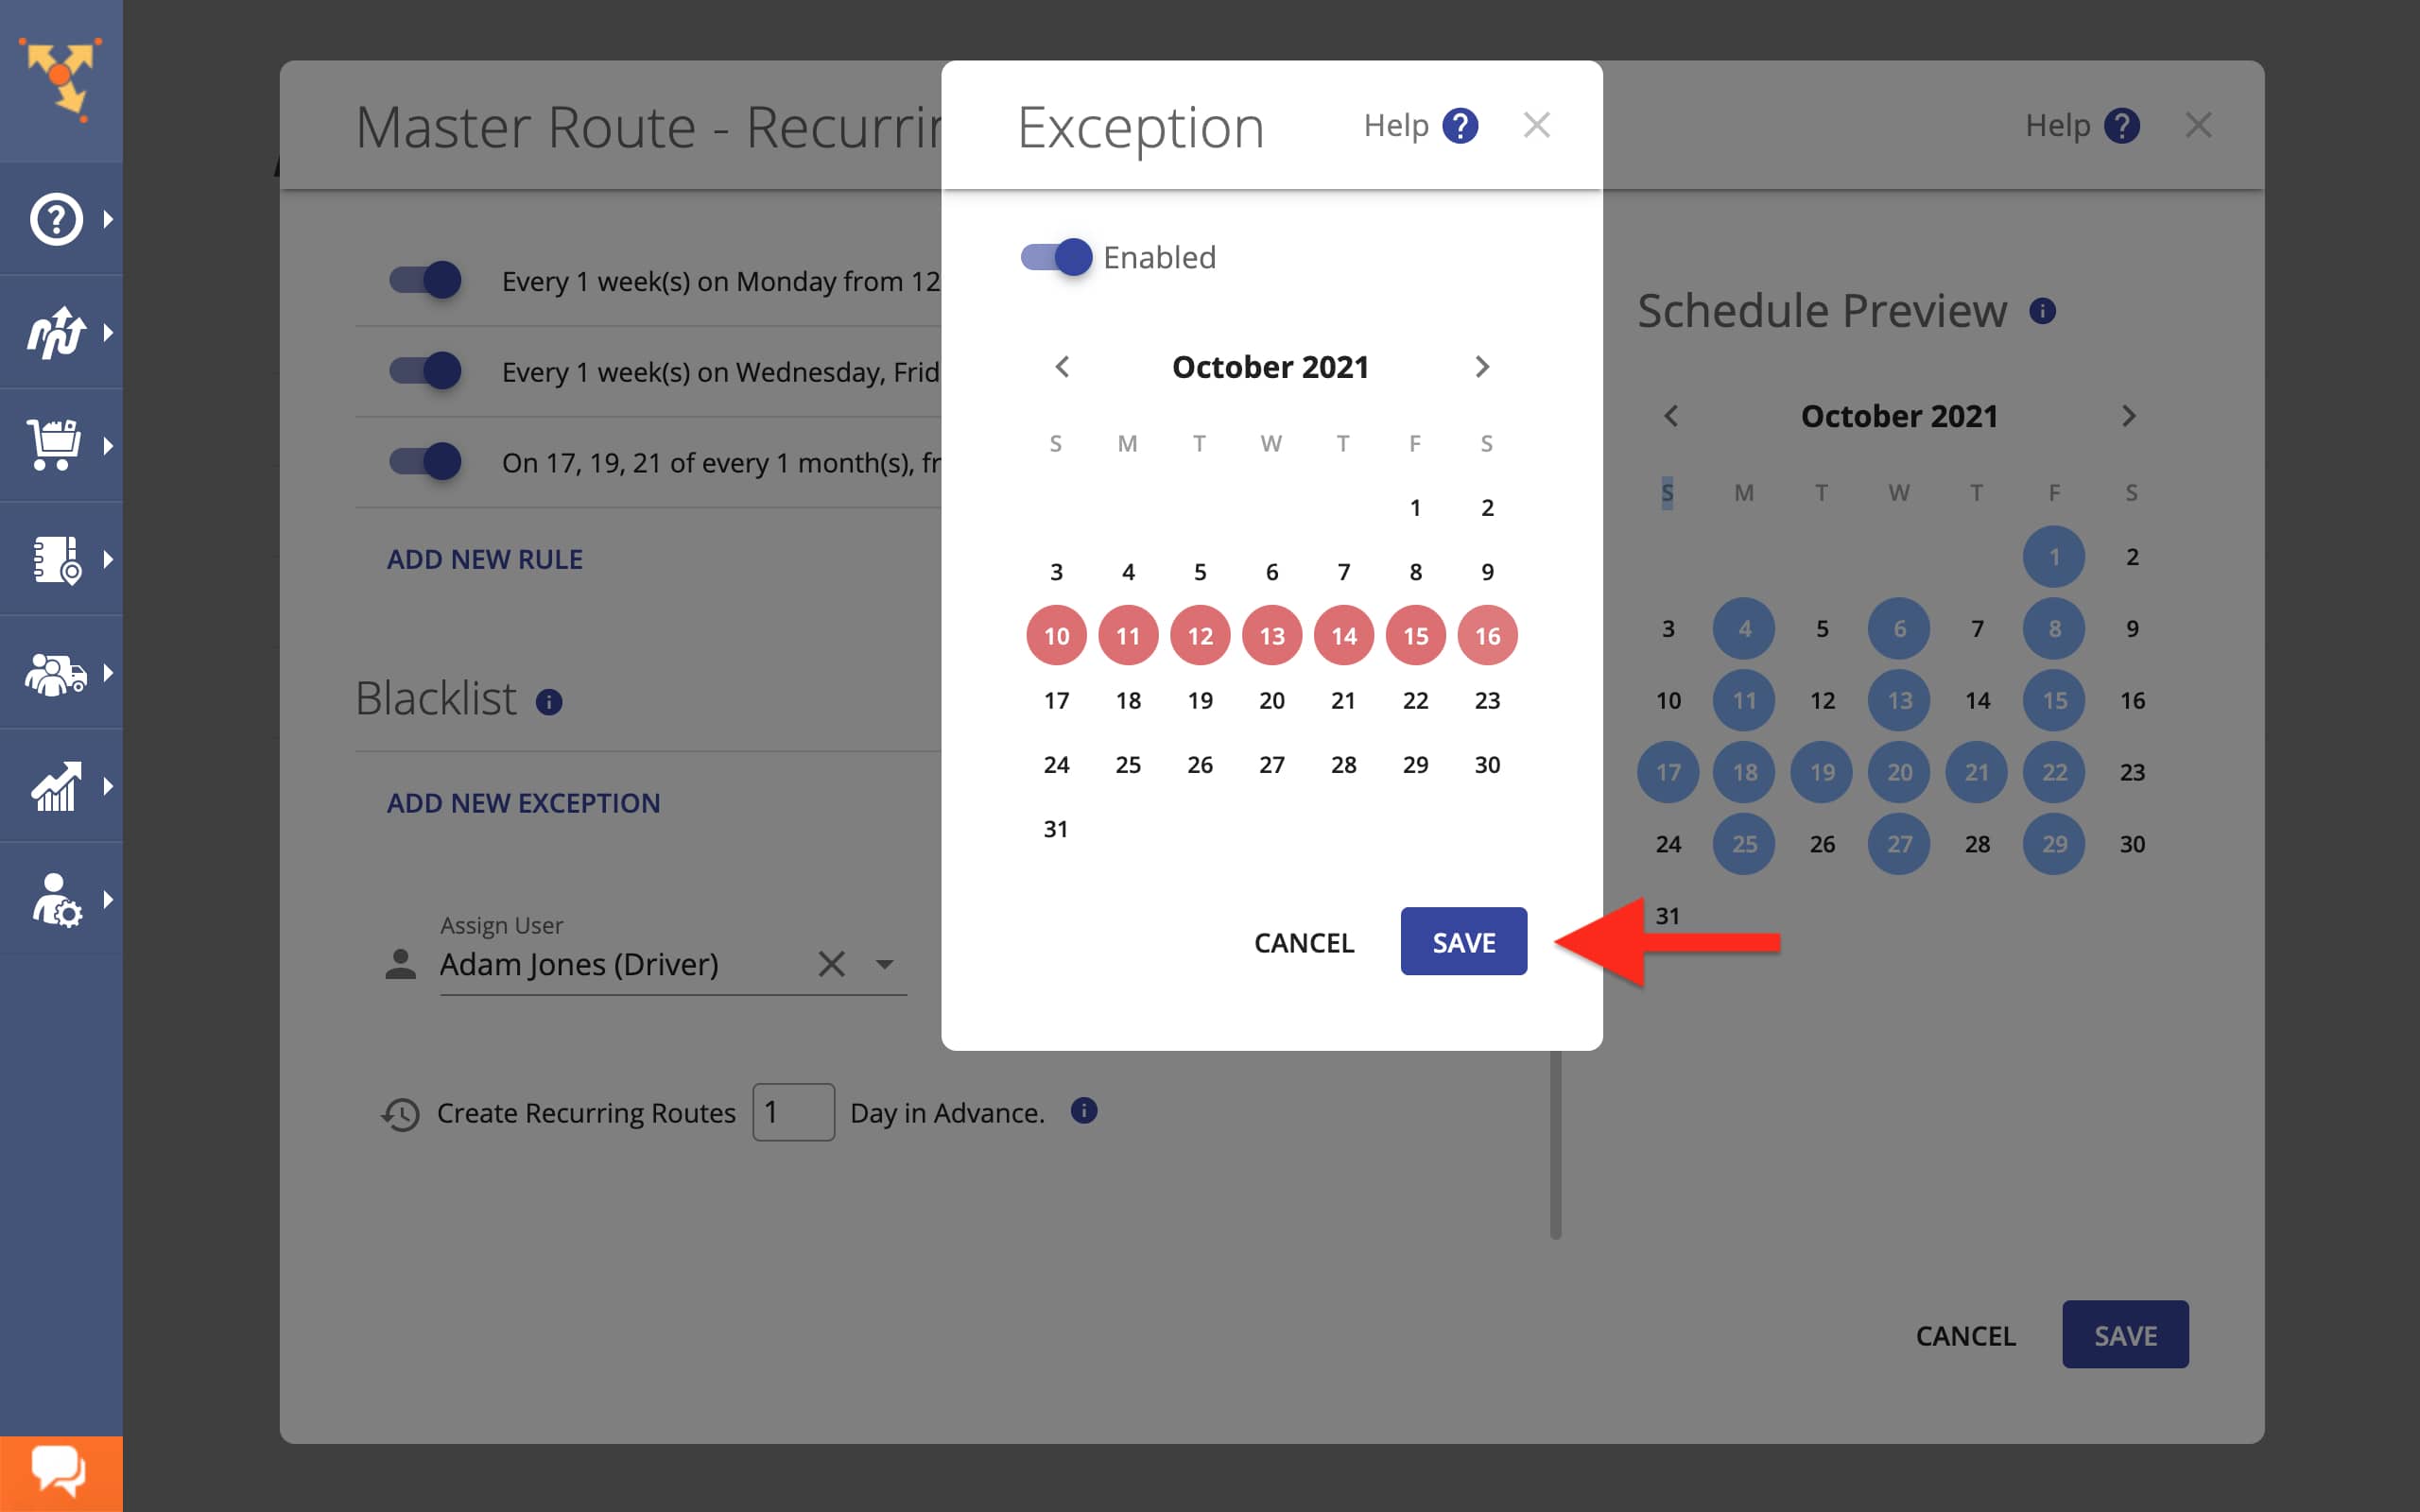 Pick dates on the delivery calendar and add non-routing days to the recurring route blacklist.